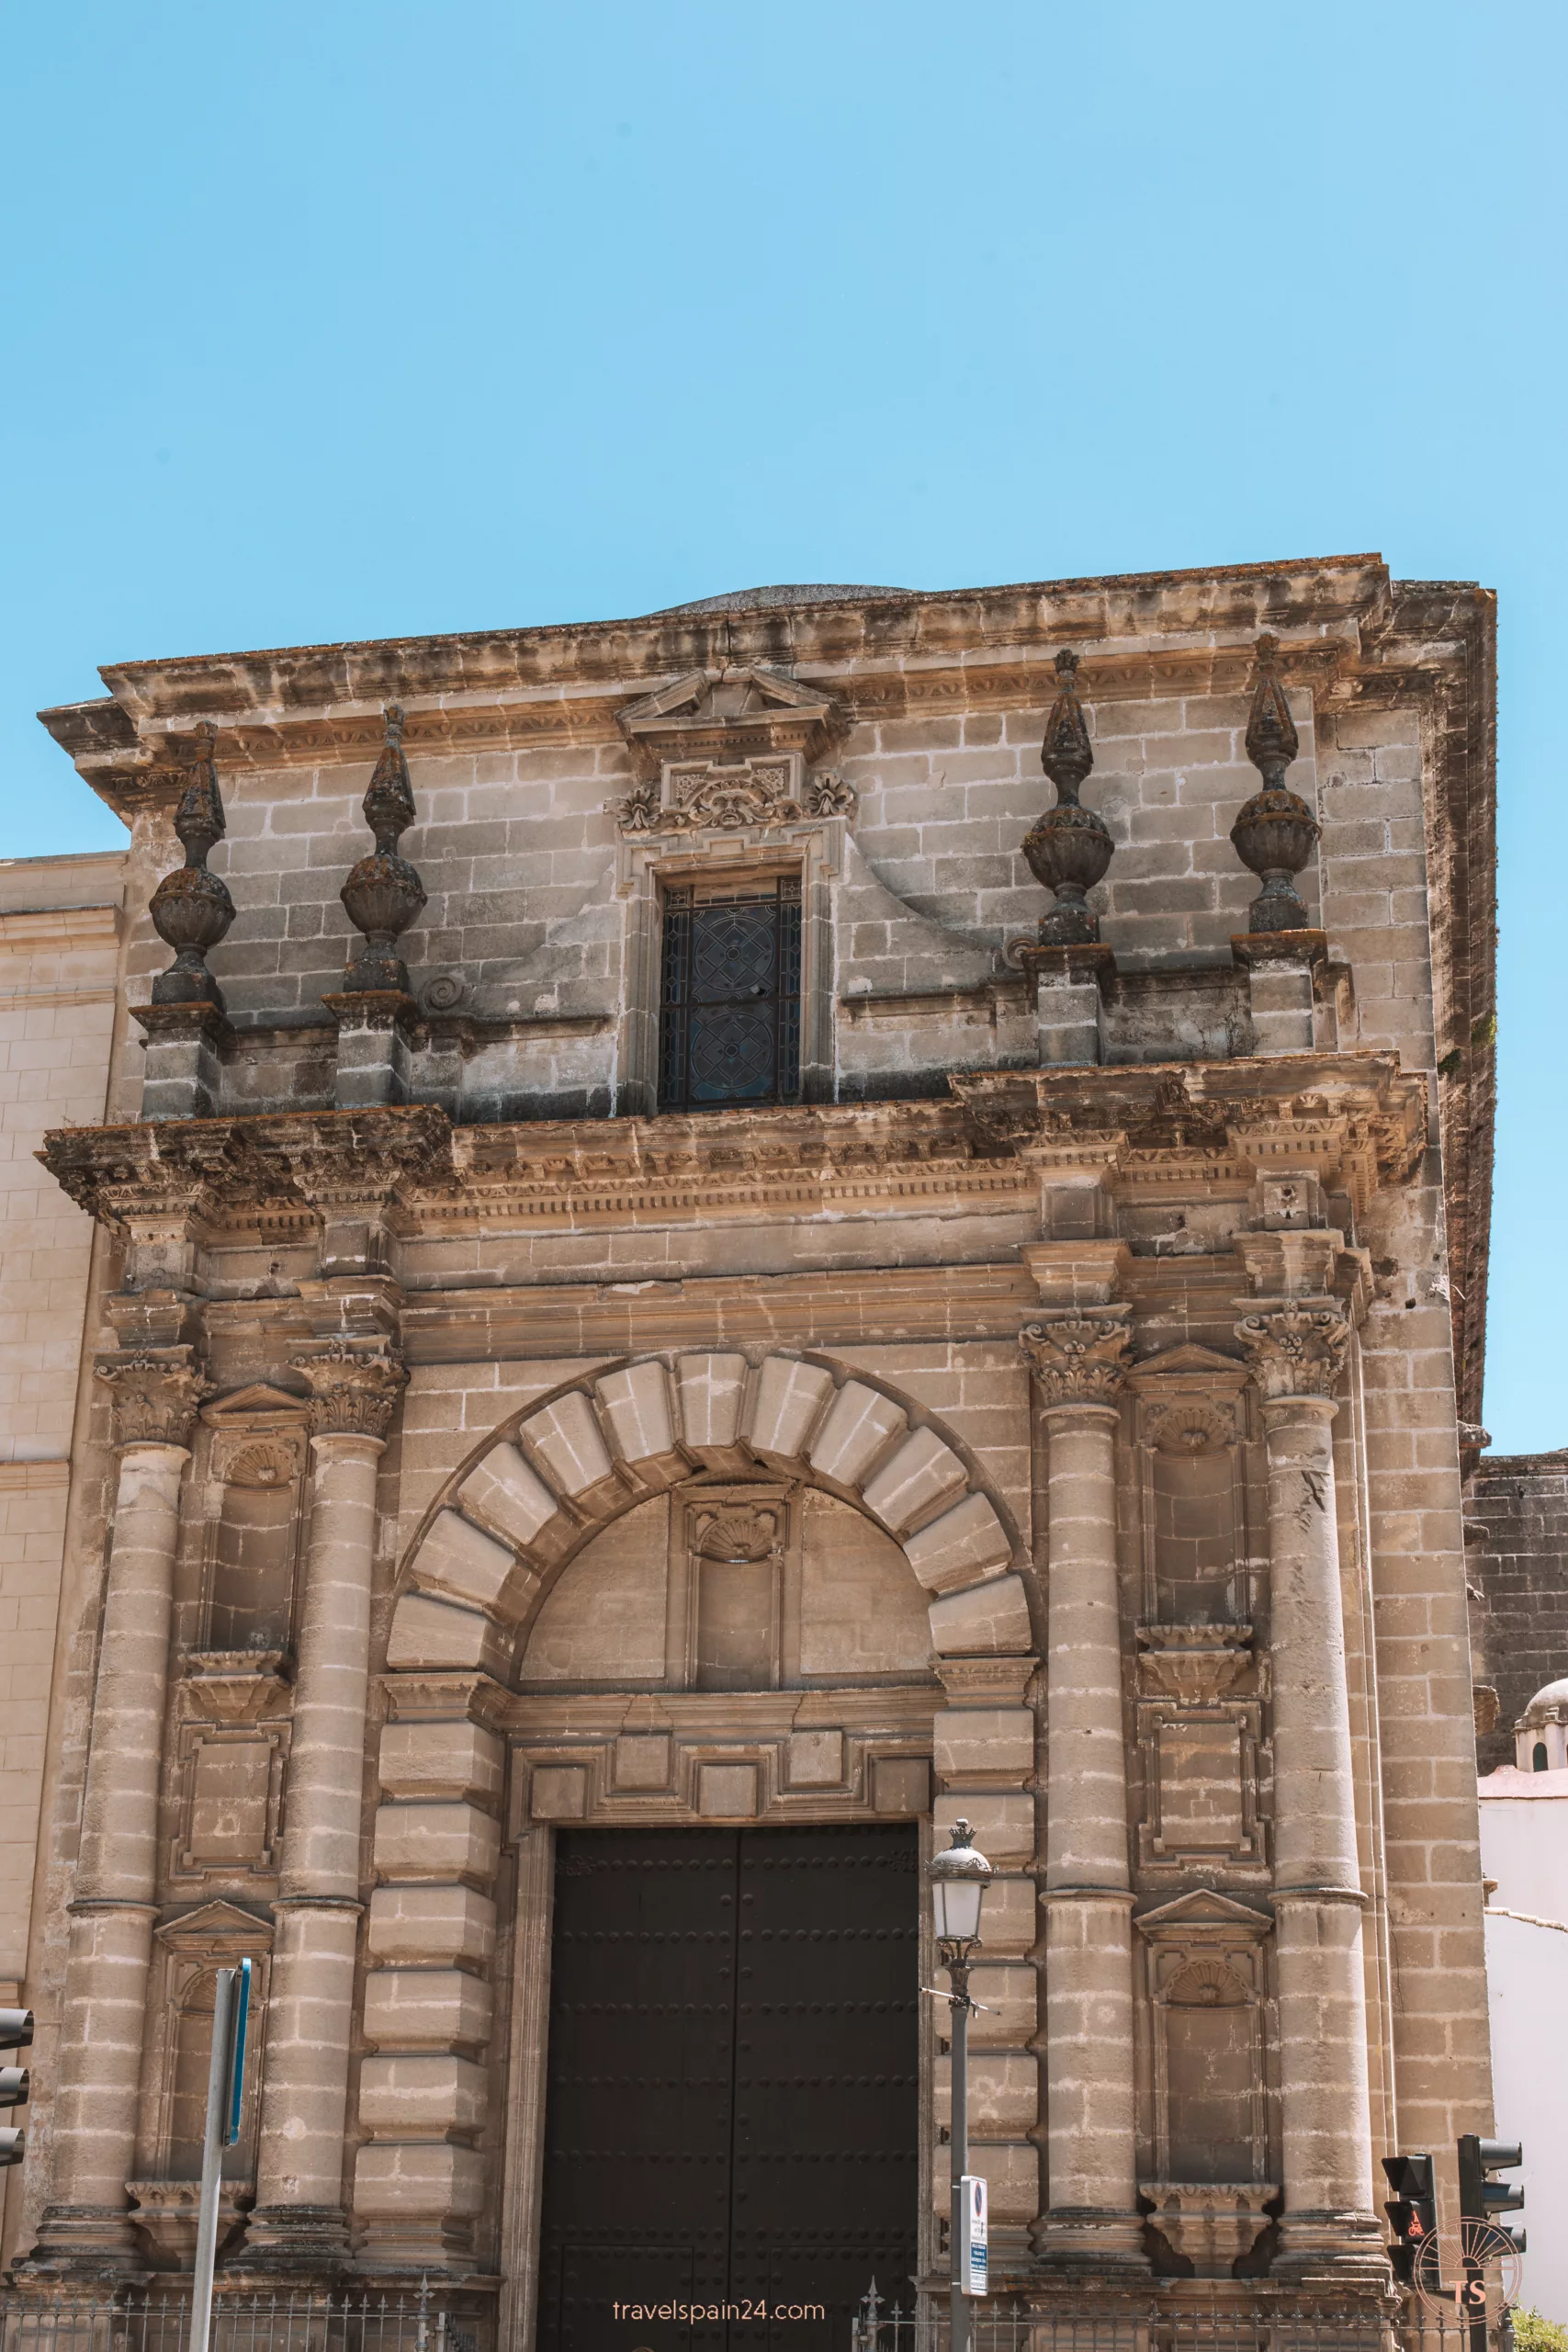 Entrance to the facade of the monastery in Jerez de la Frontera. This image showcases another notable religious site in the city.